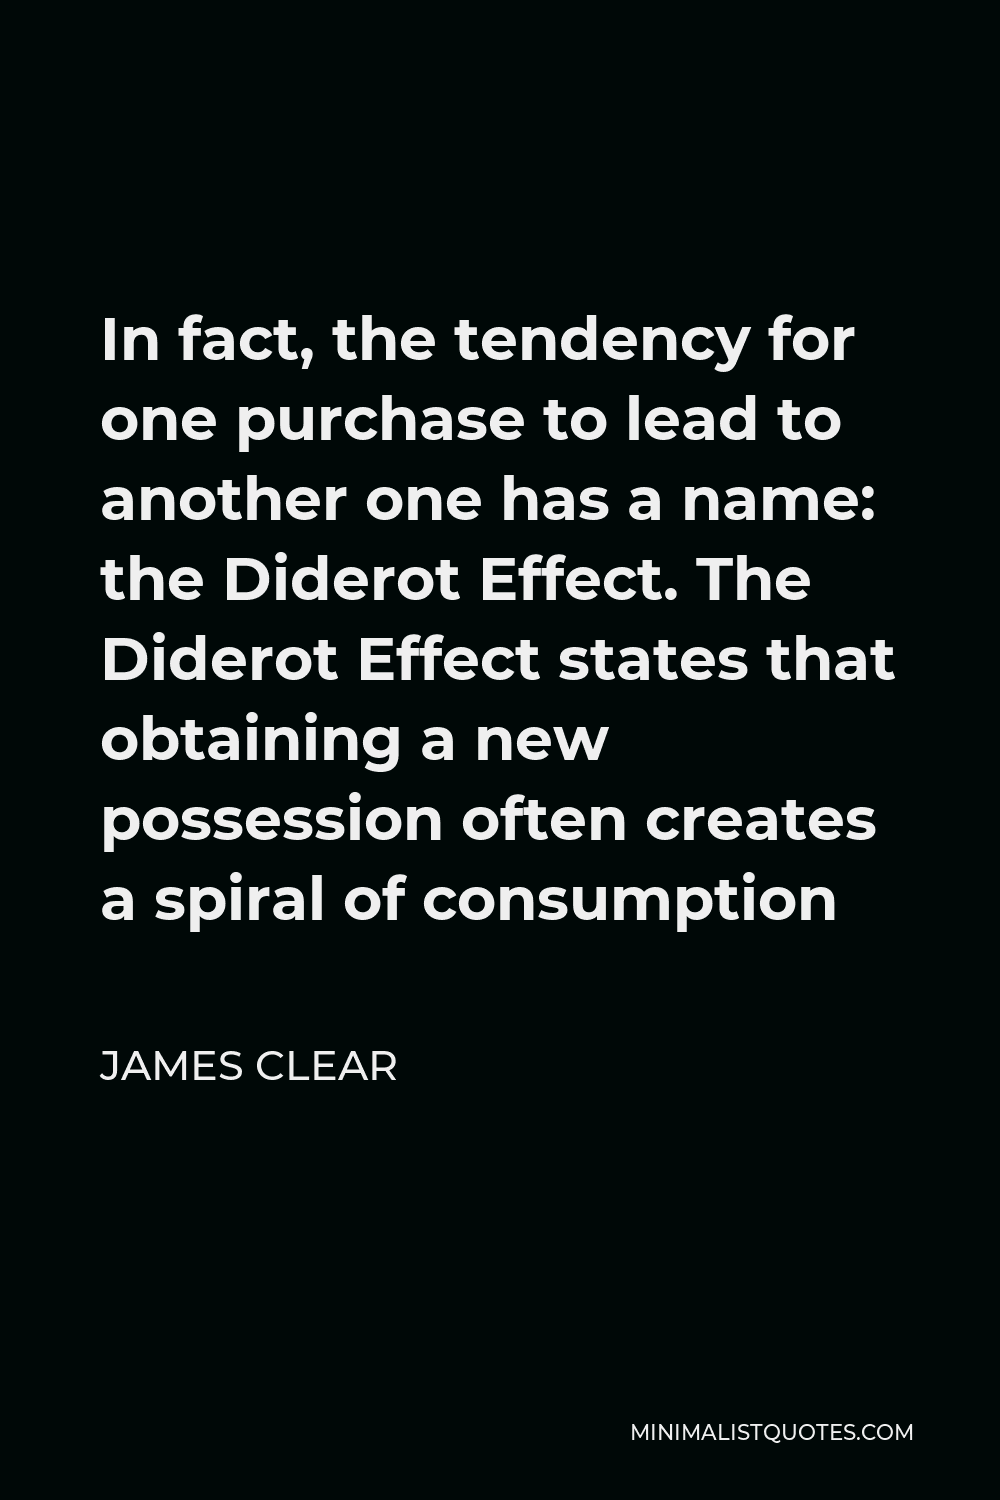 James Clear Quote - In fact, the tendency for one purchase to lead to another one has a name: the Diderot Effect. The Diderot Effect states that obtaining a new possession often creates a spiral of consumption